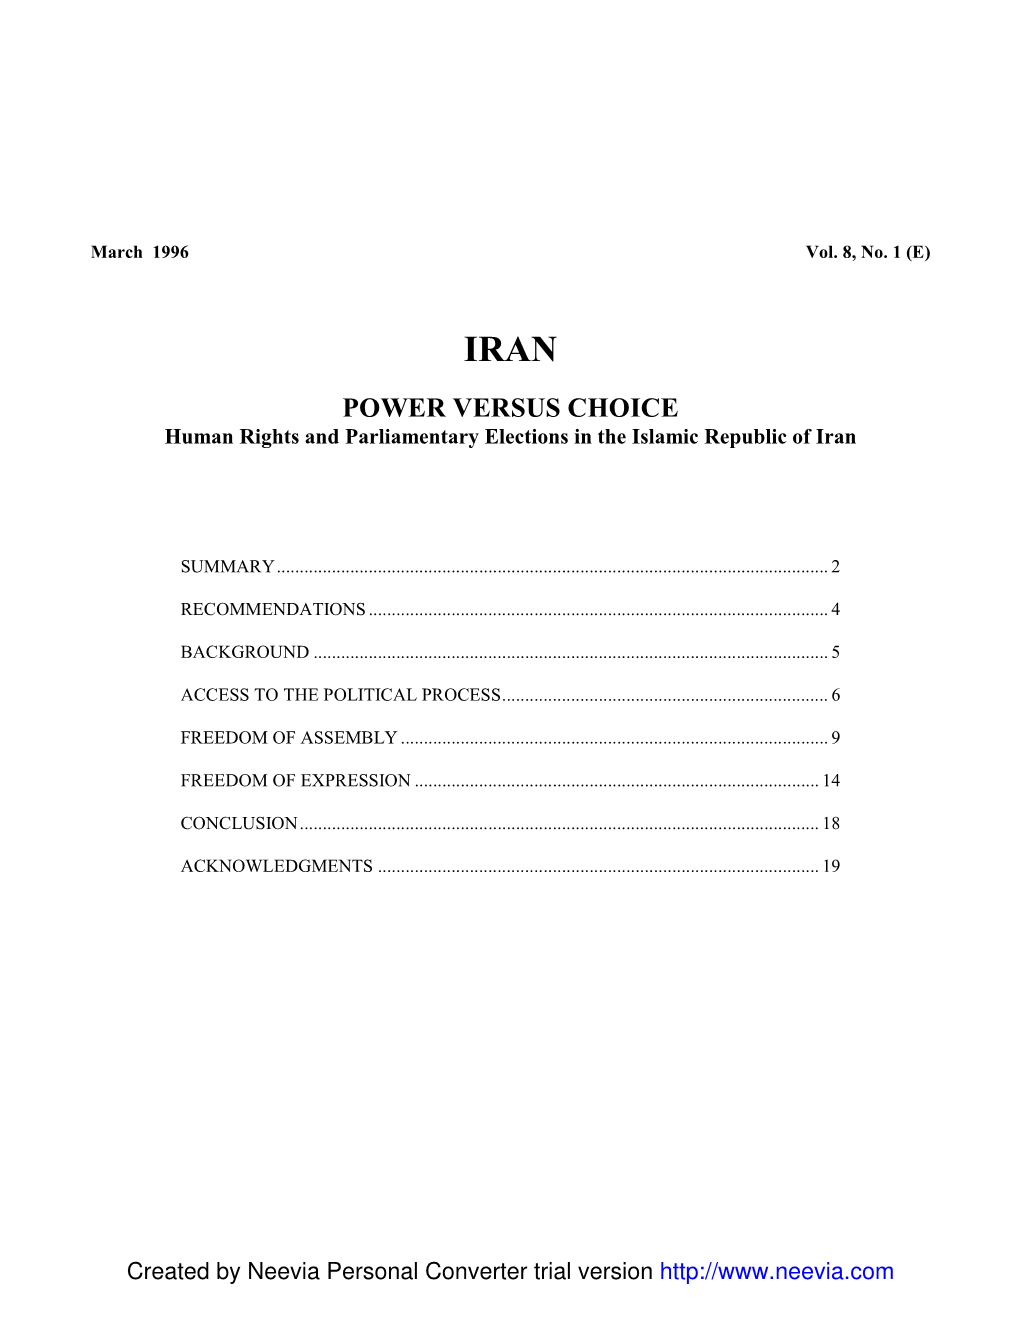 POWER VERSUS CHOICE Human Rights and Parliamentary Elections in the Islamic Republic of Iran